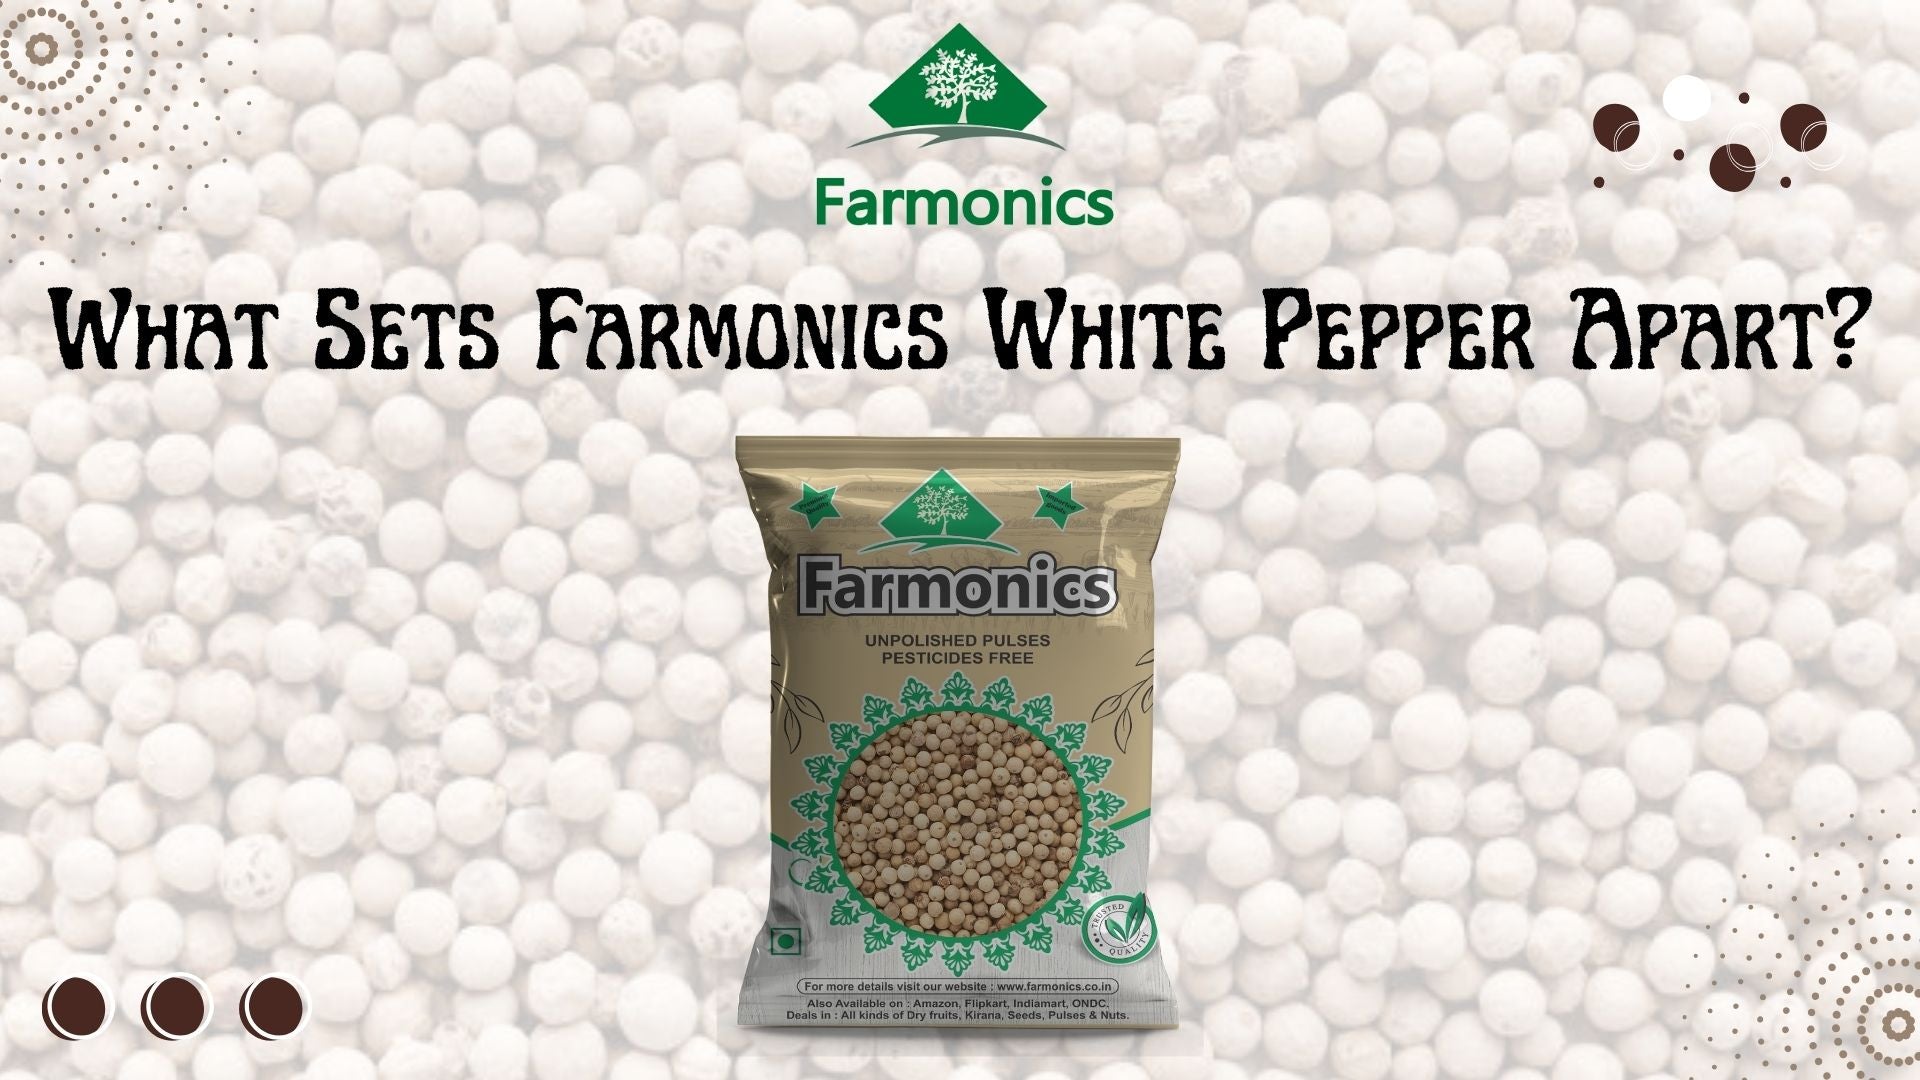 what sets Farmonics white pepper apart from others